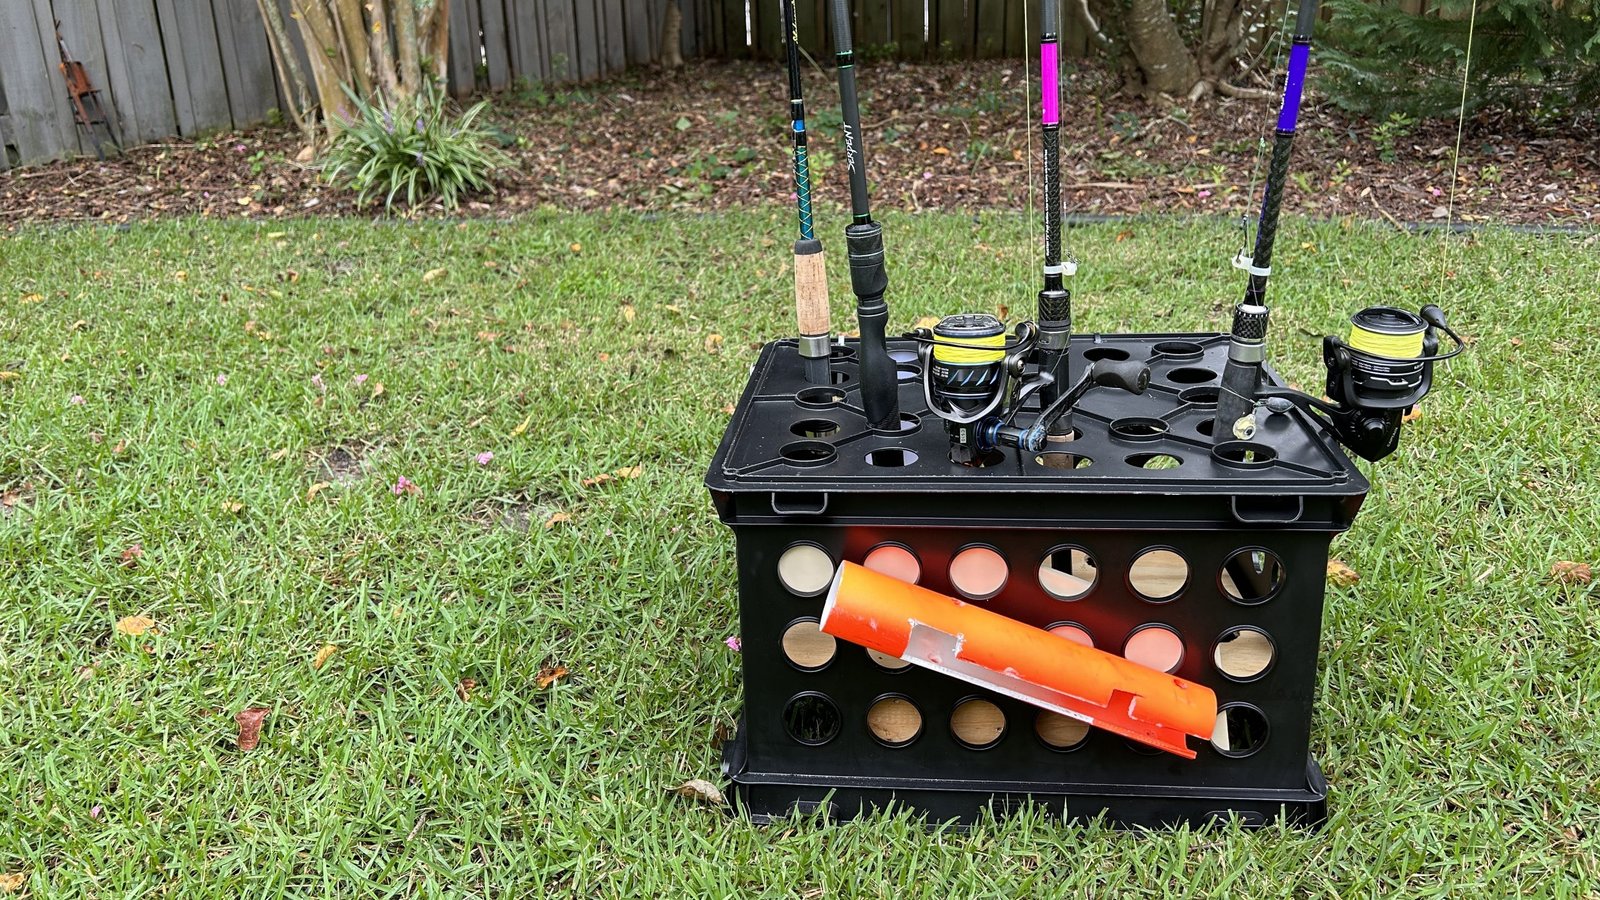 Add Fishing Rod Storage to Your Milk Crate Fishing Rod Holder